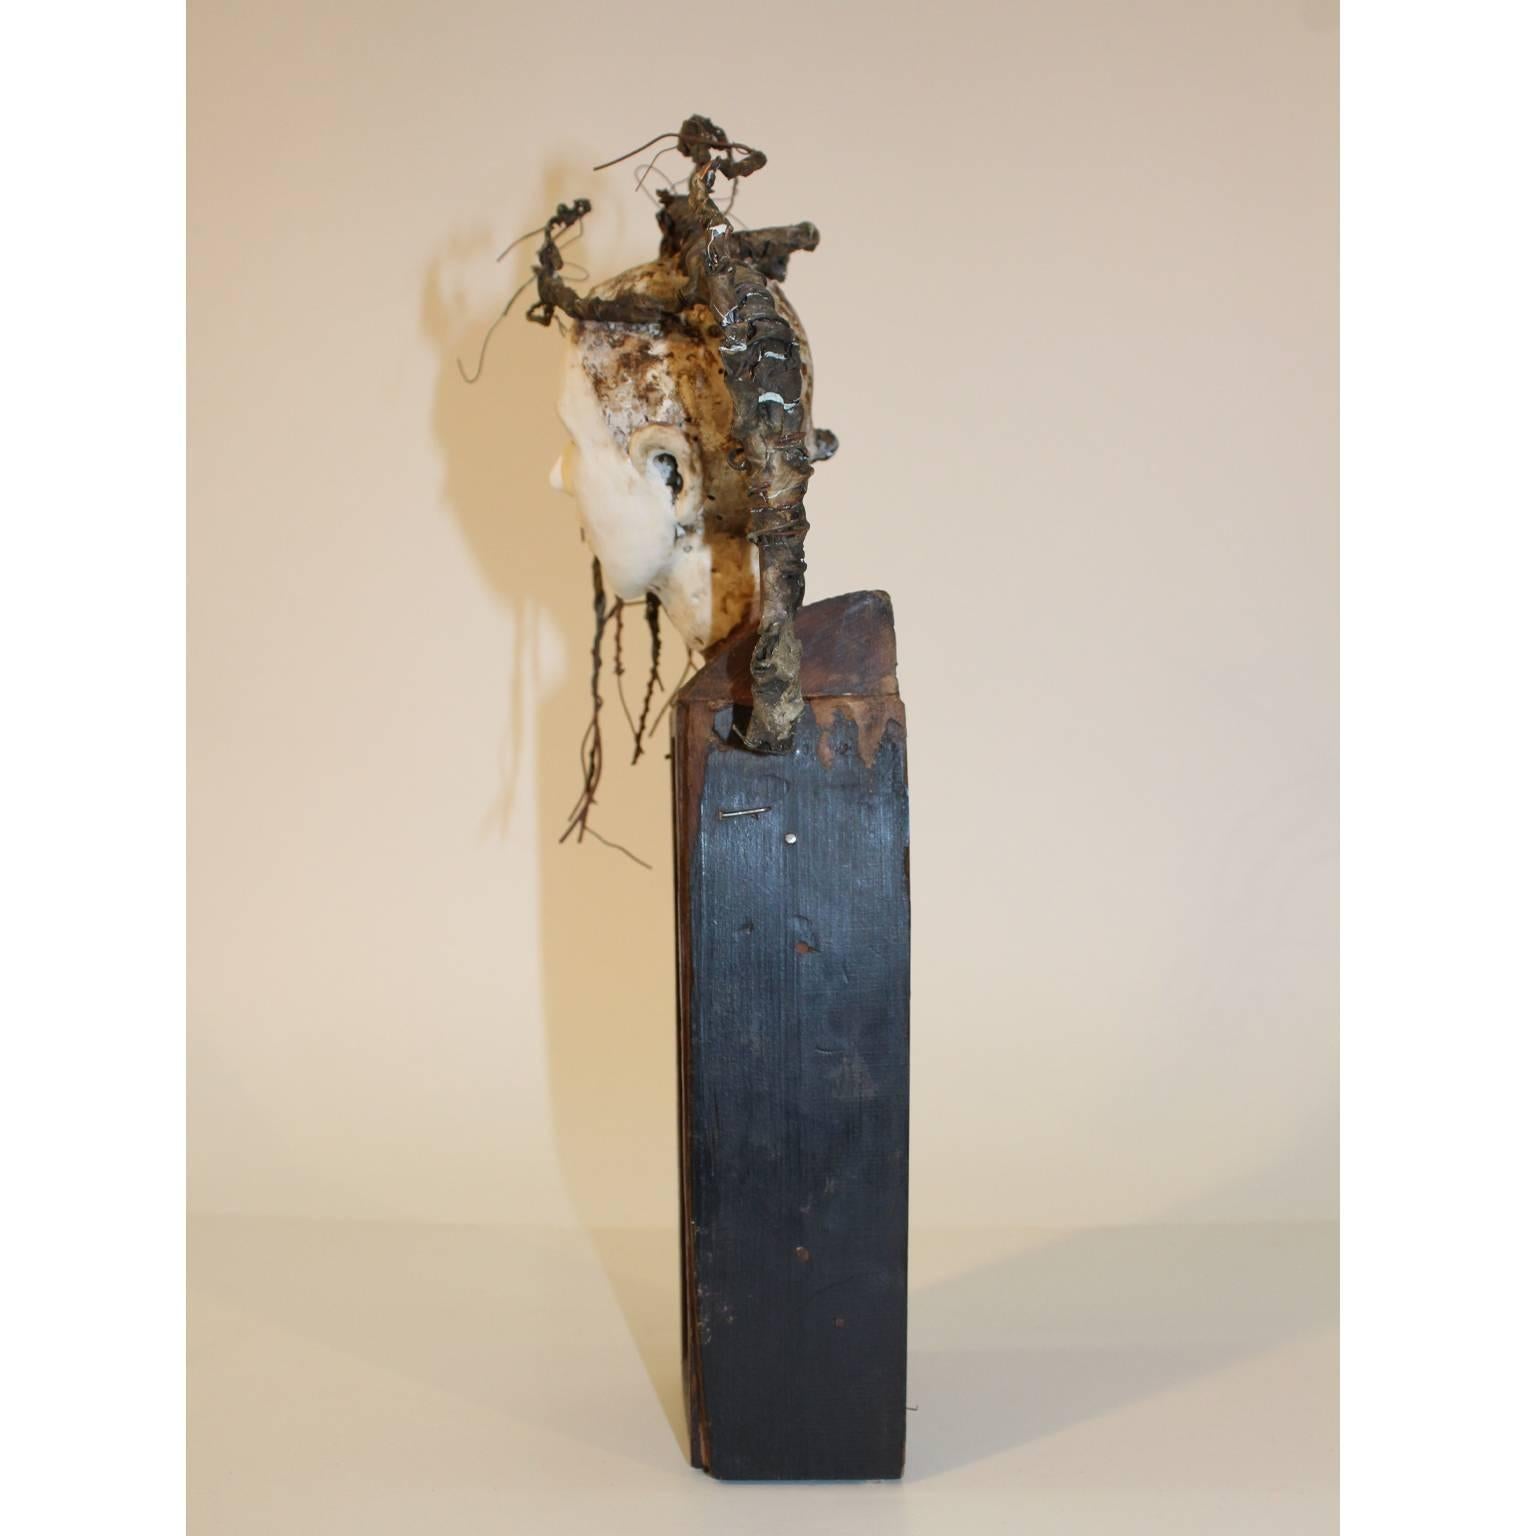 Produced in 2012 by New-Orleans artist Cathy Rose. This sculpture is an assemblage of wood, found objects and a porcelain female head. In excellent condition and signed on the back. 

110268.